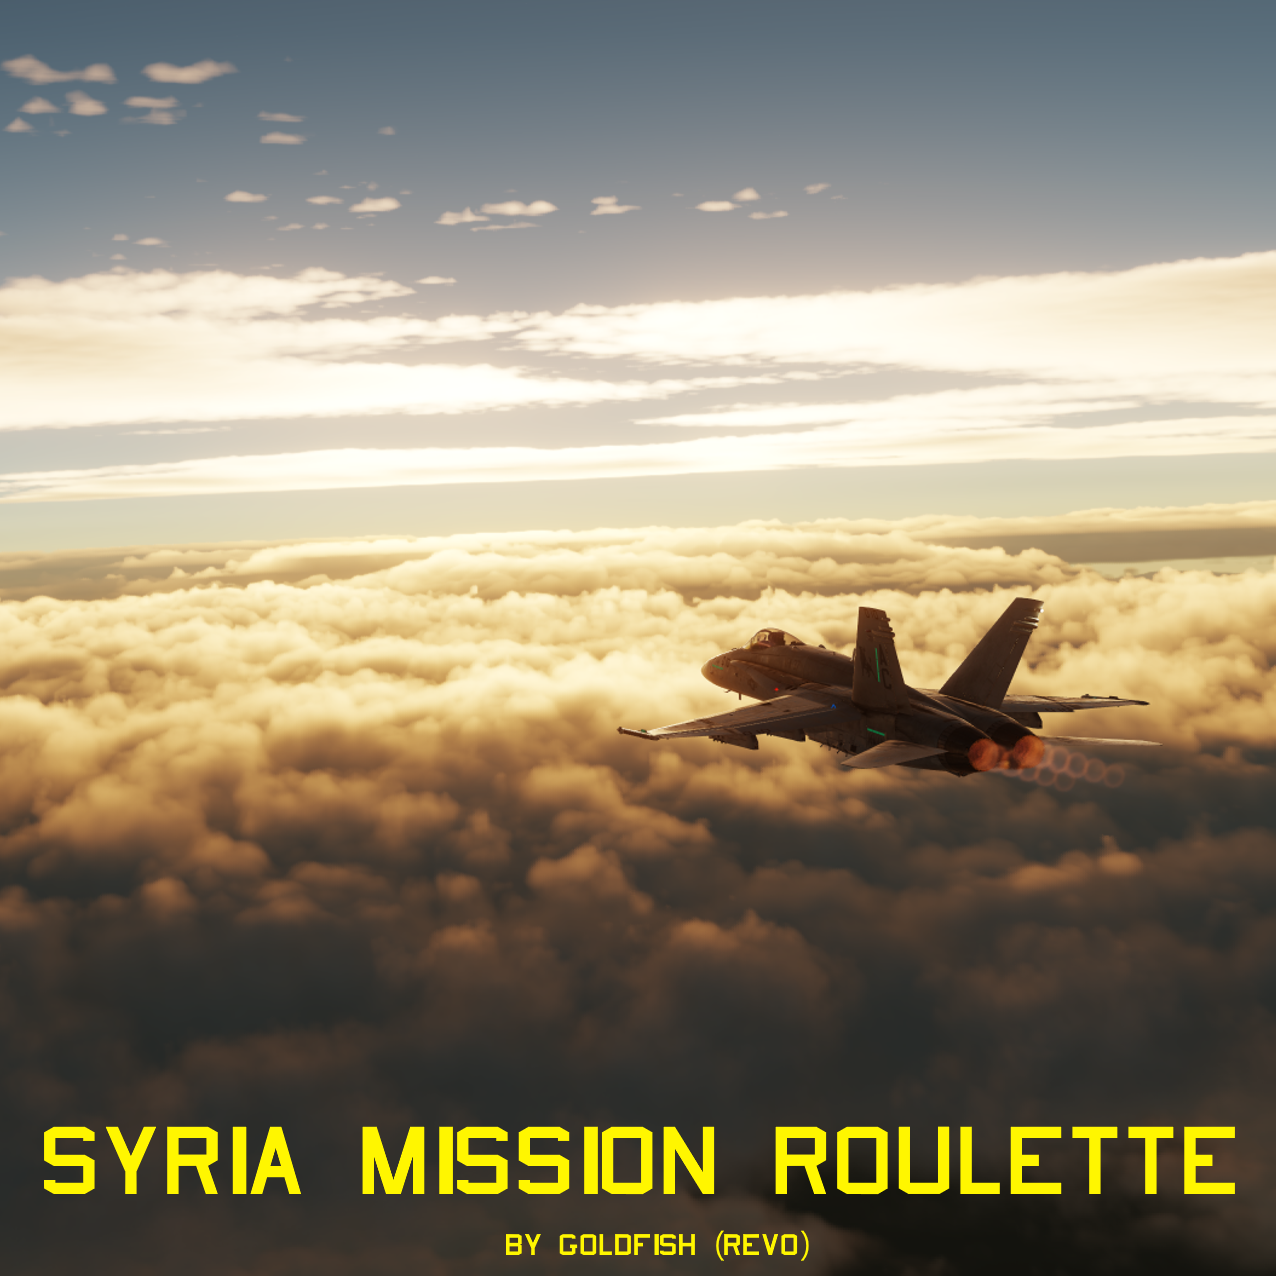 Syria Mission Roulette